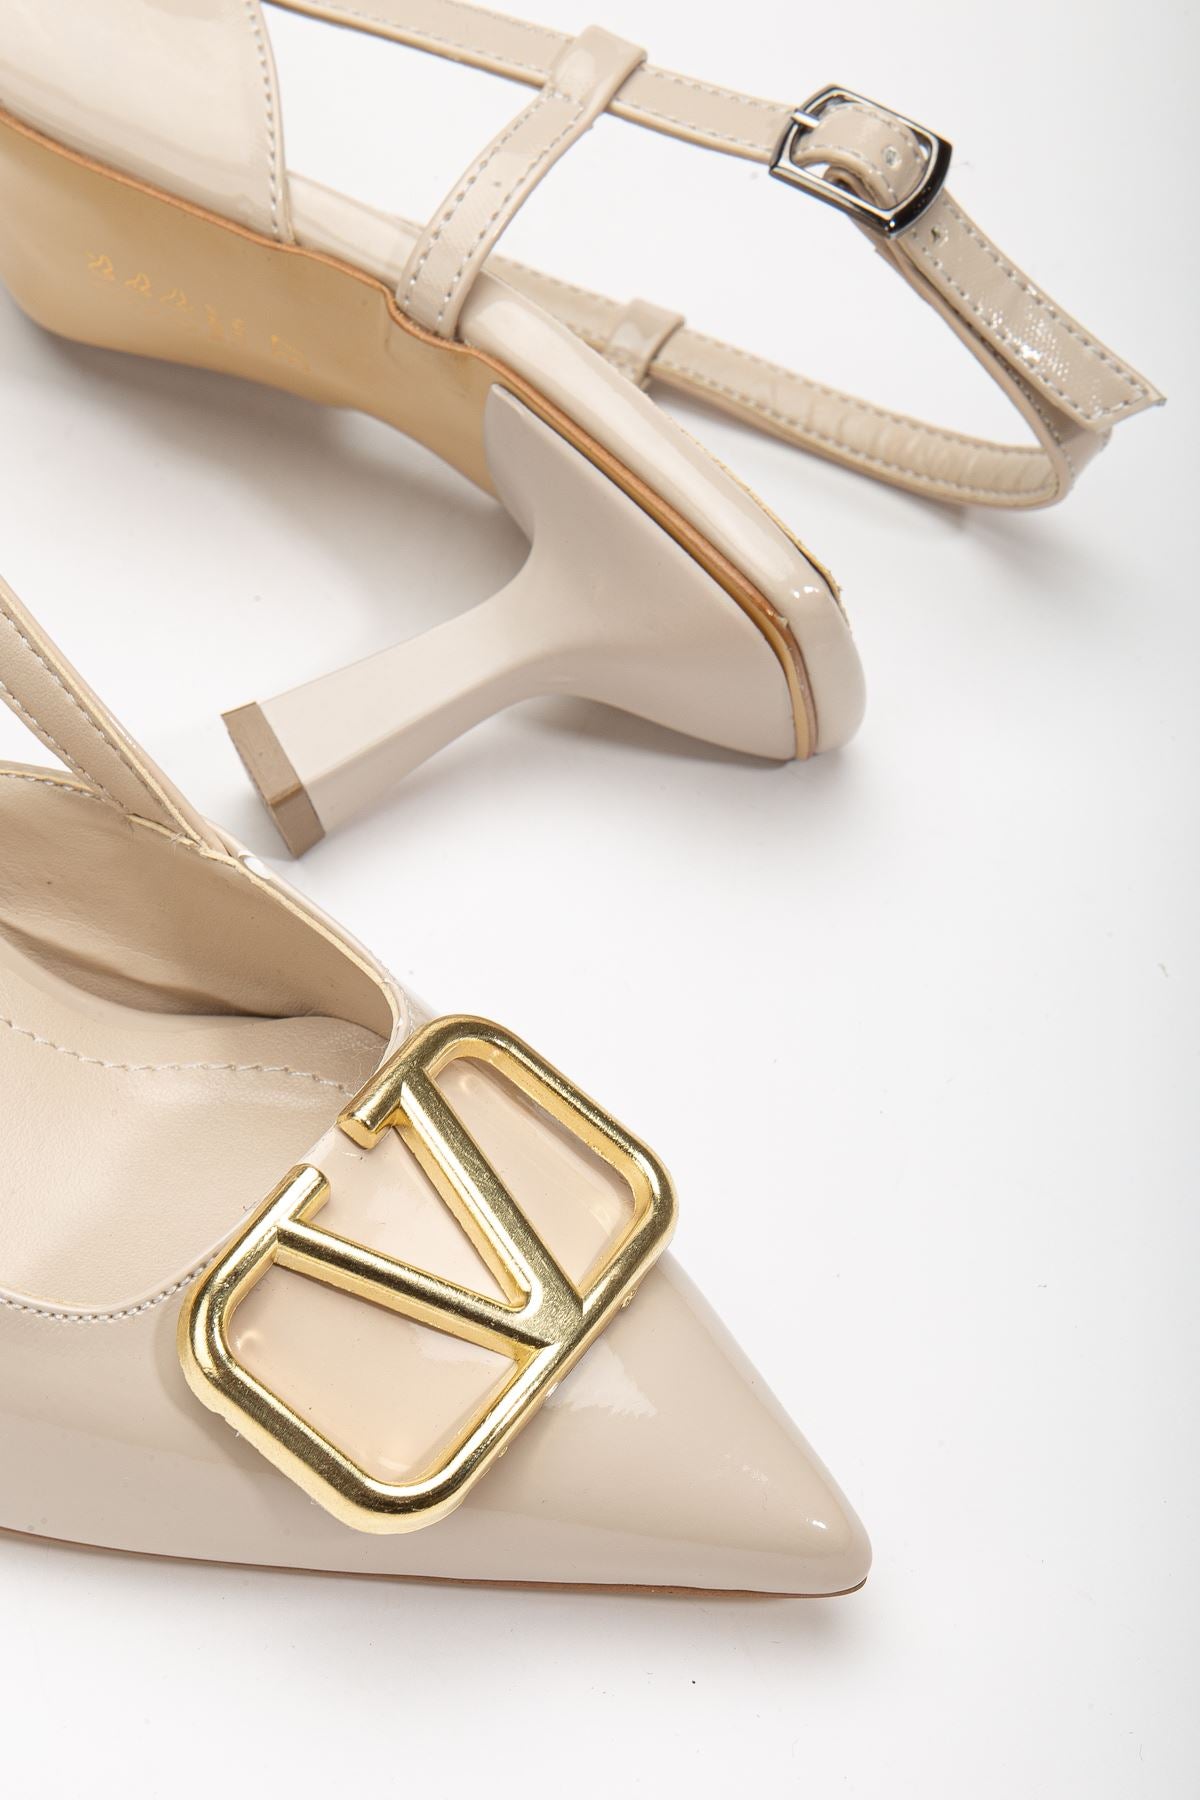 Women's Lianne Cream Patent Leather Buckle Detailed Thin Heeled Shoes - STREETMODE™